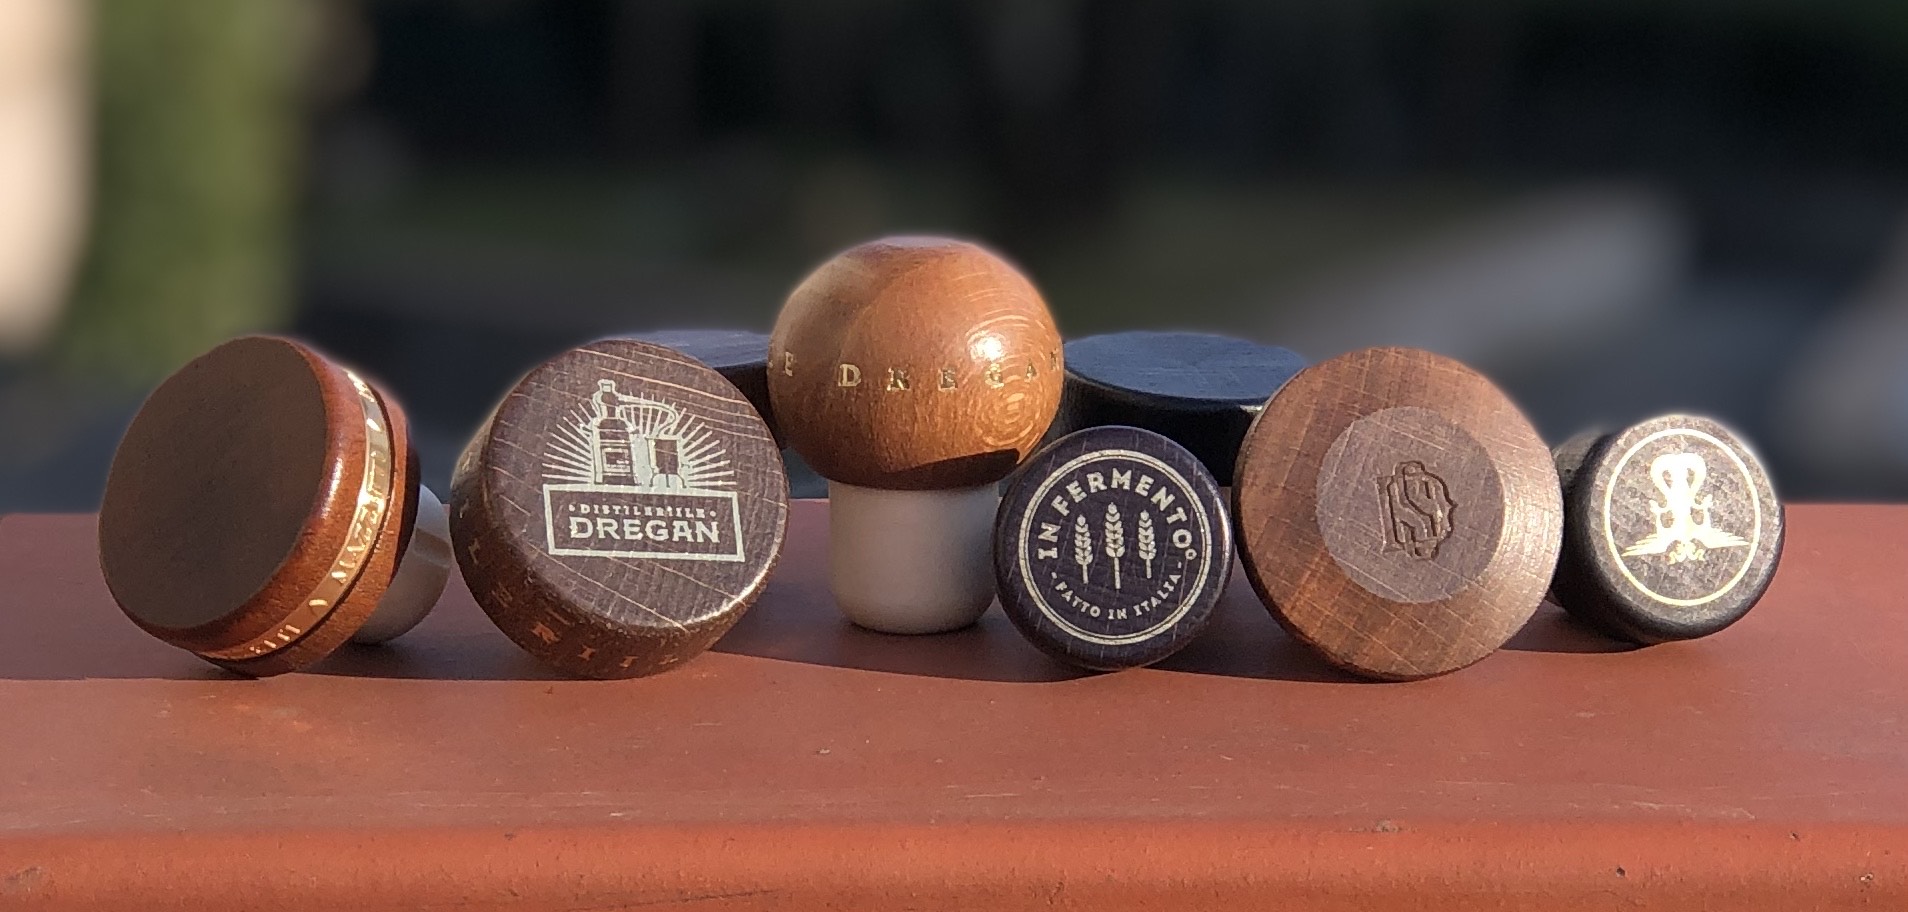 Our wooden caps: the comfort of creativity